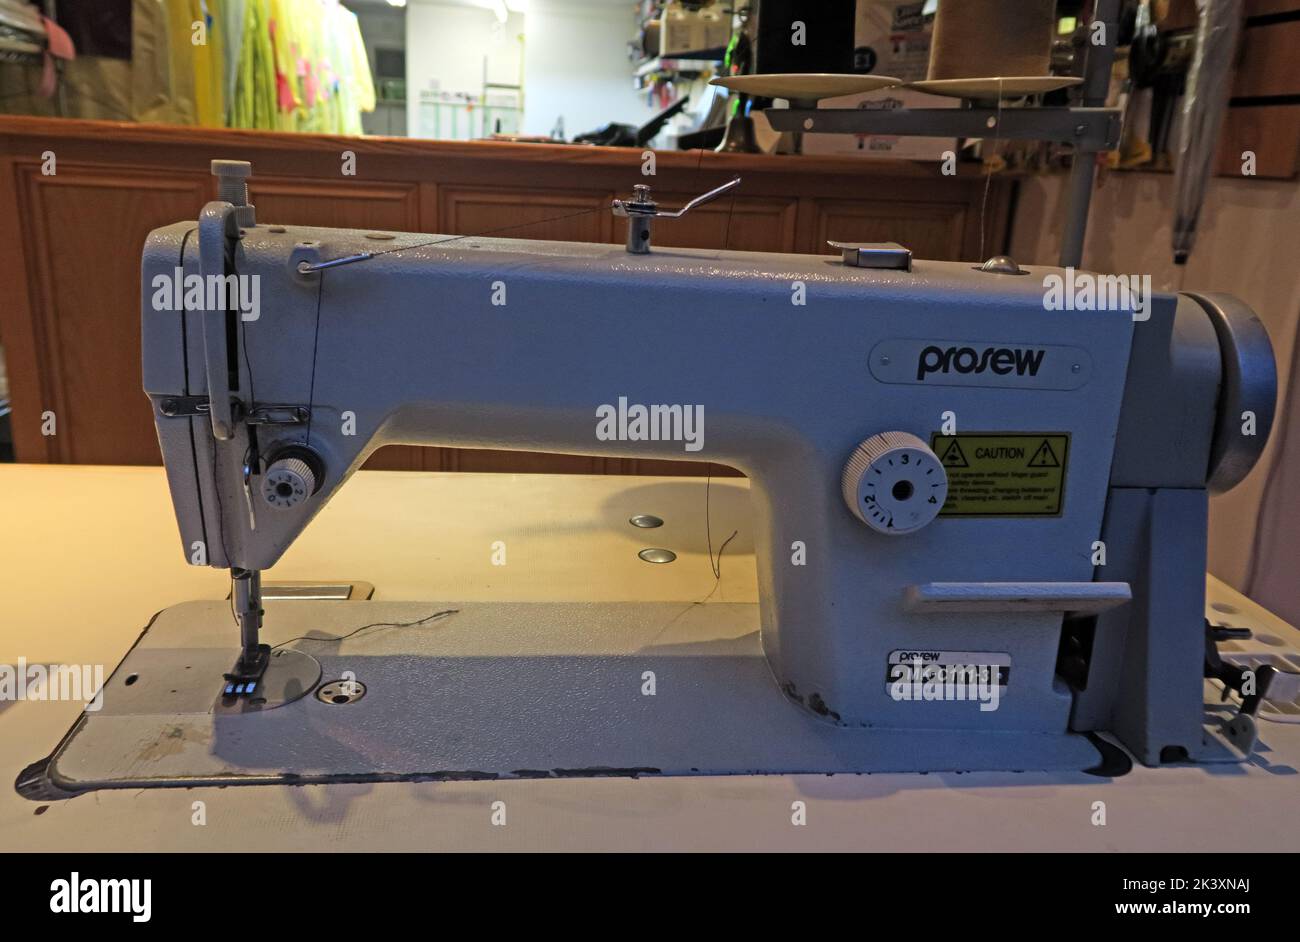 Prosew C111-3 Lockstitch (AP0280) industrial sewing machine in an empty alterations shop workshop Stock Photo